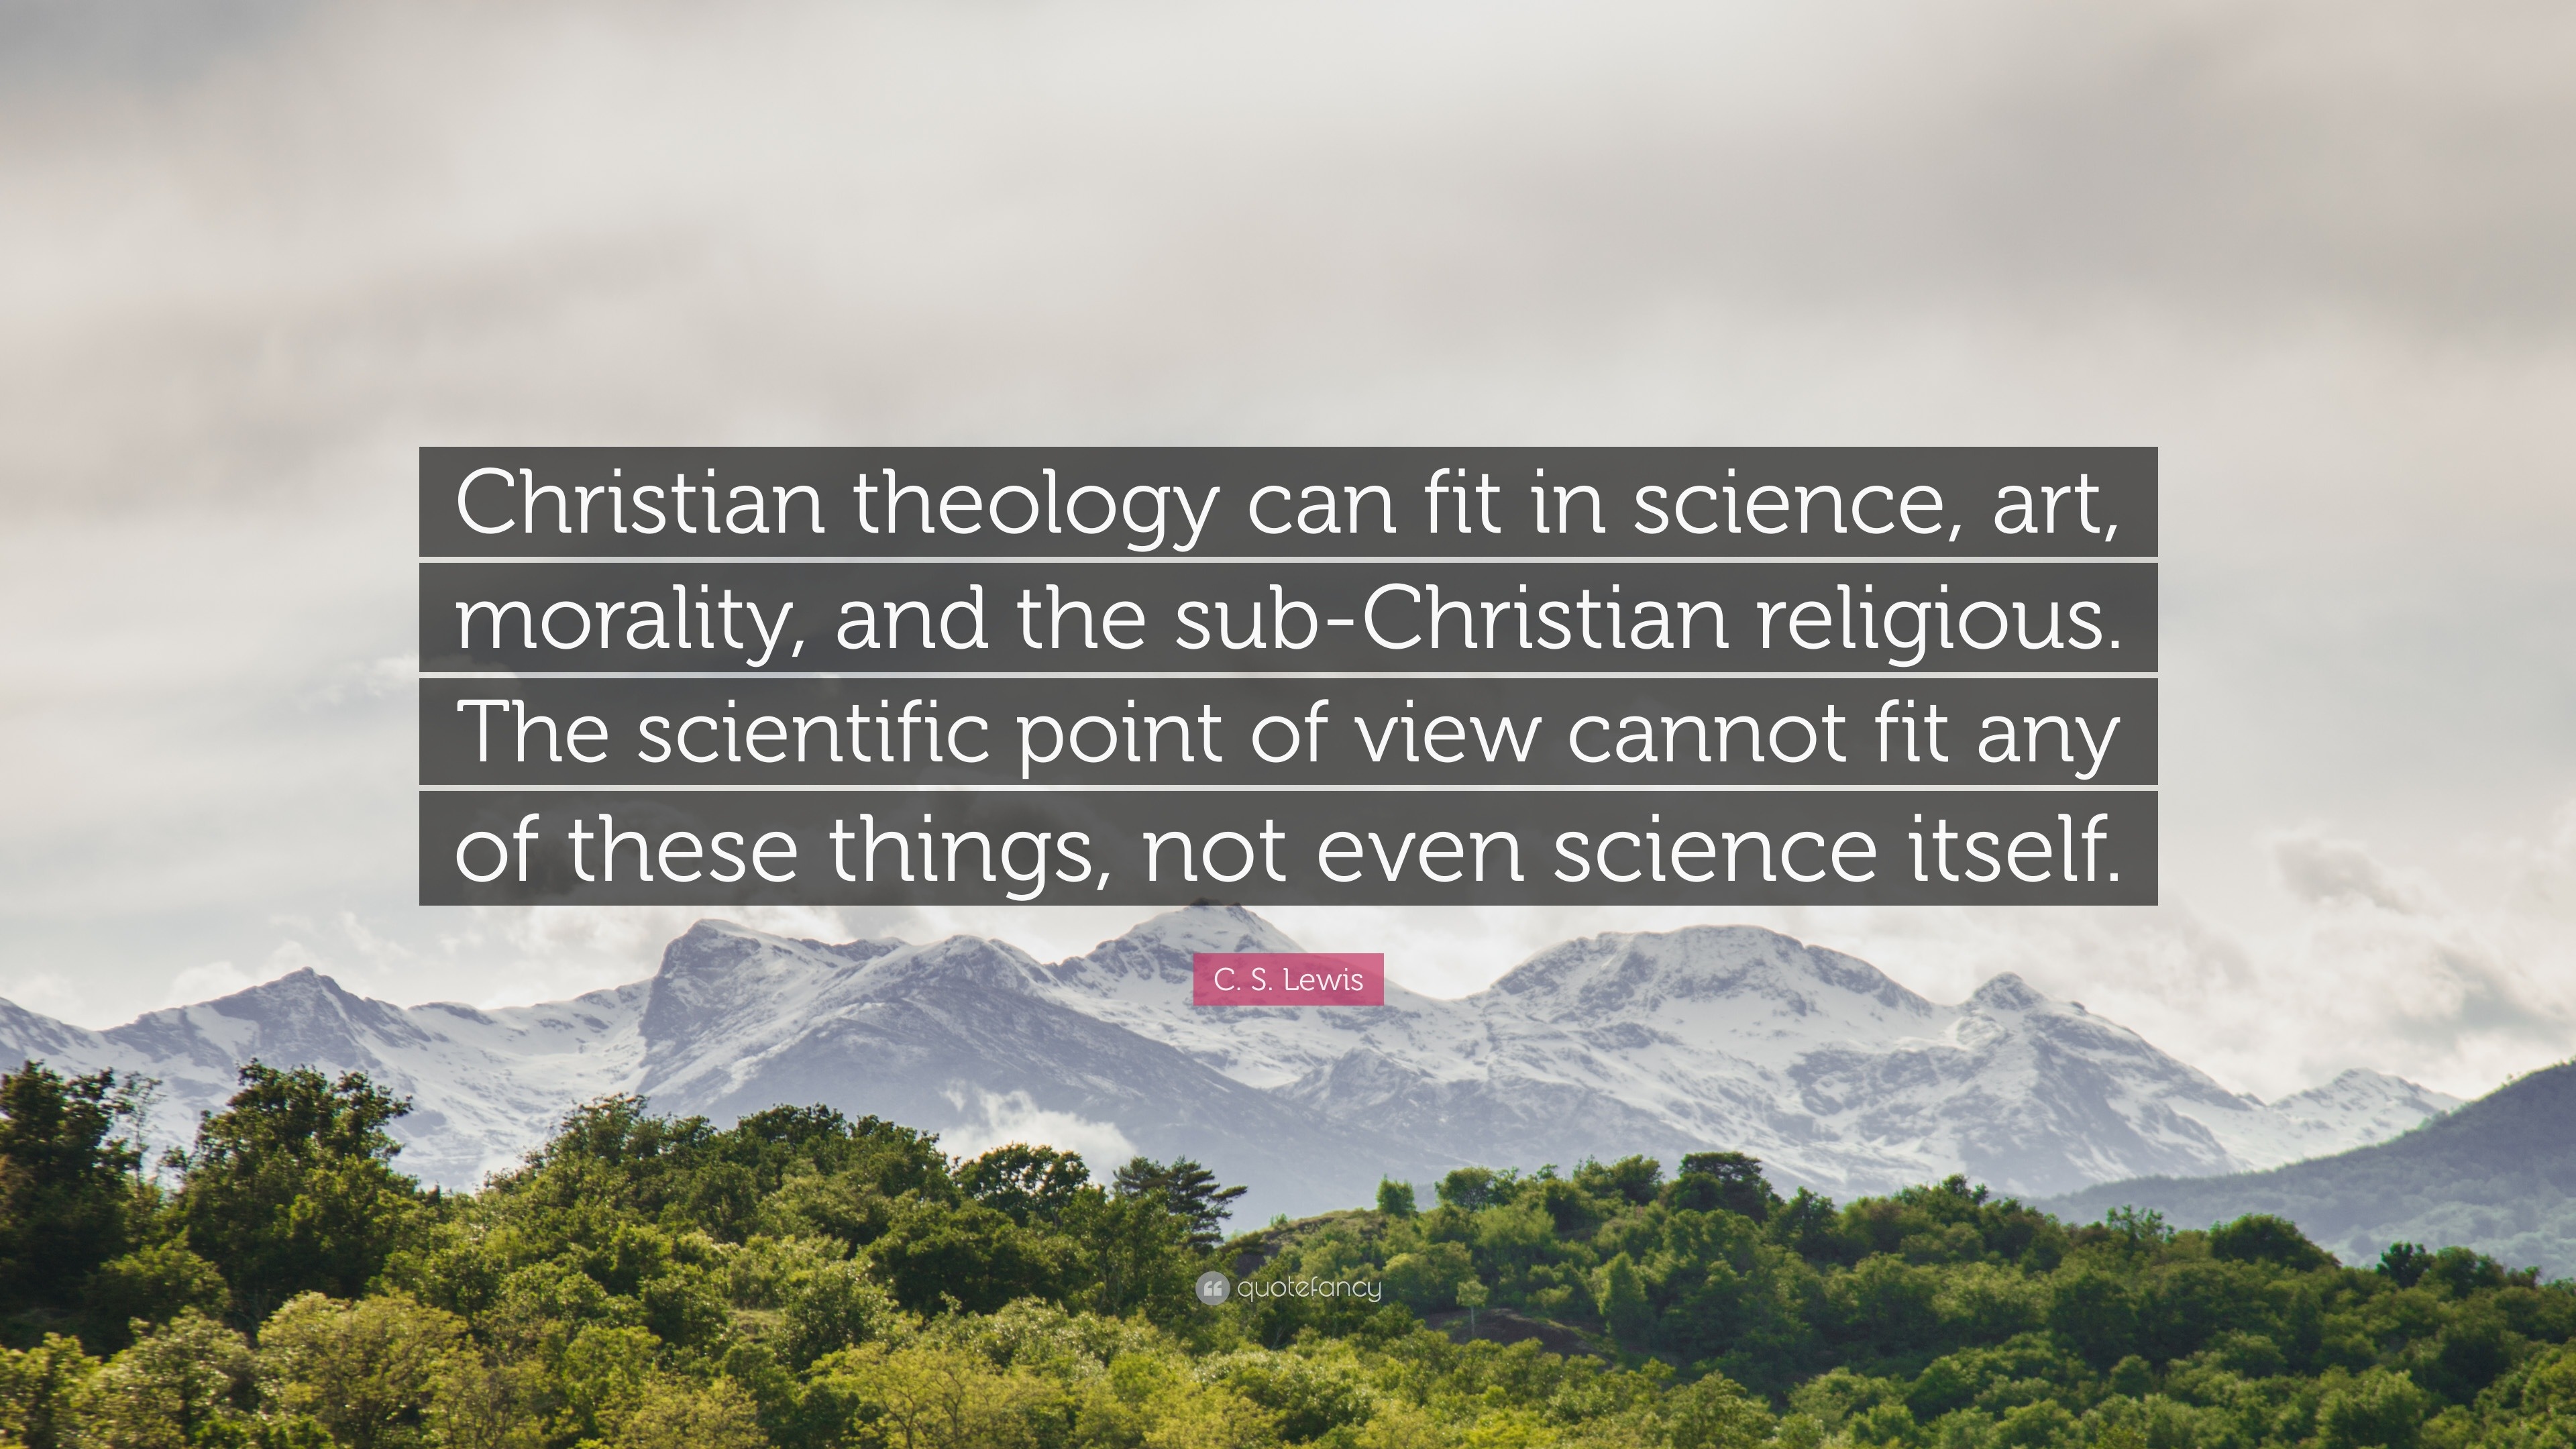 C. S. Lewis Quote: “Christian theology can fit in science, art